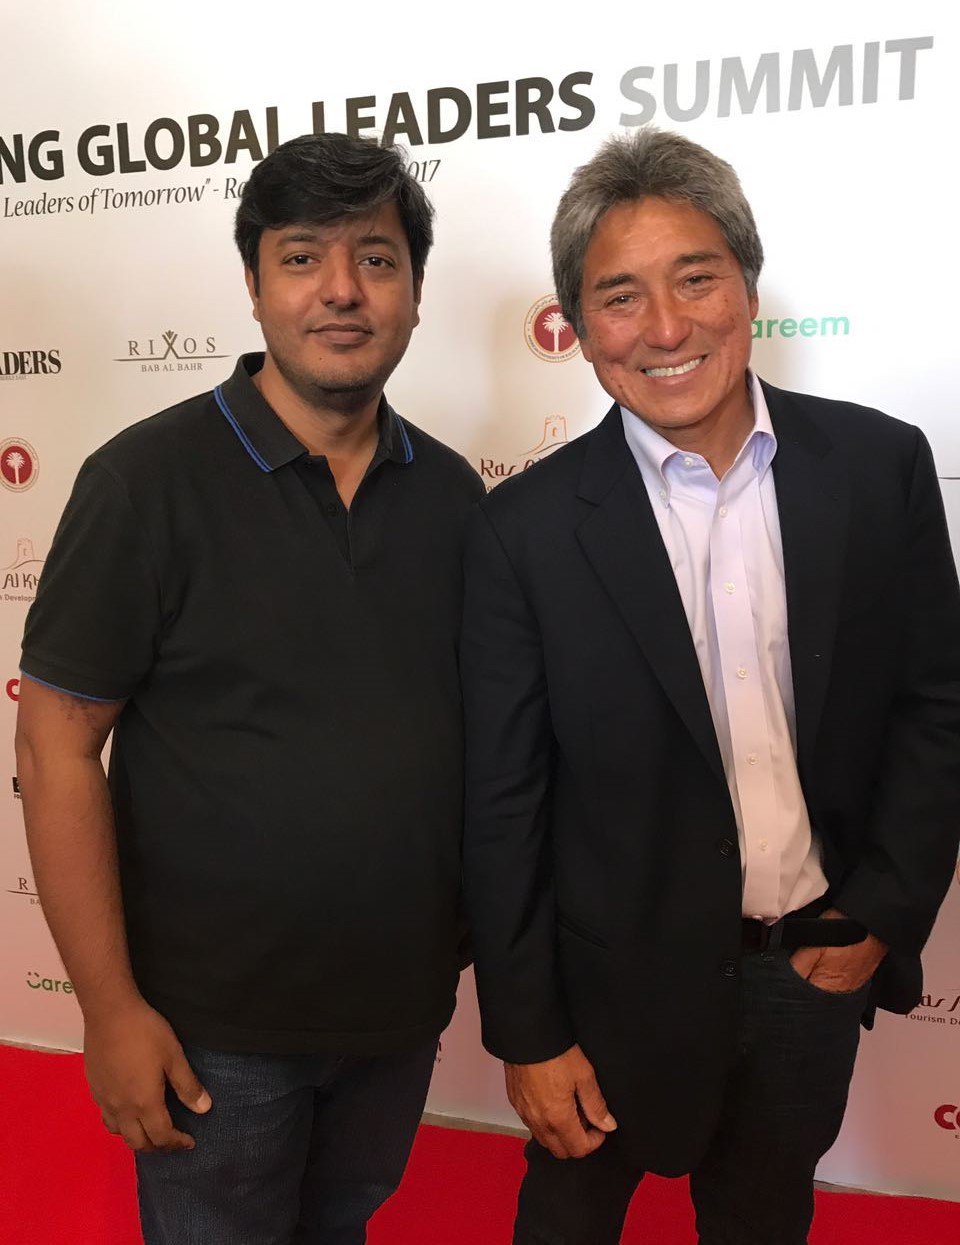 With @GuyKawasaki - one of my inspirations! - Sep 27, 2017